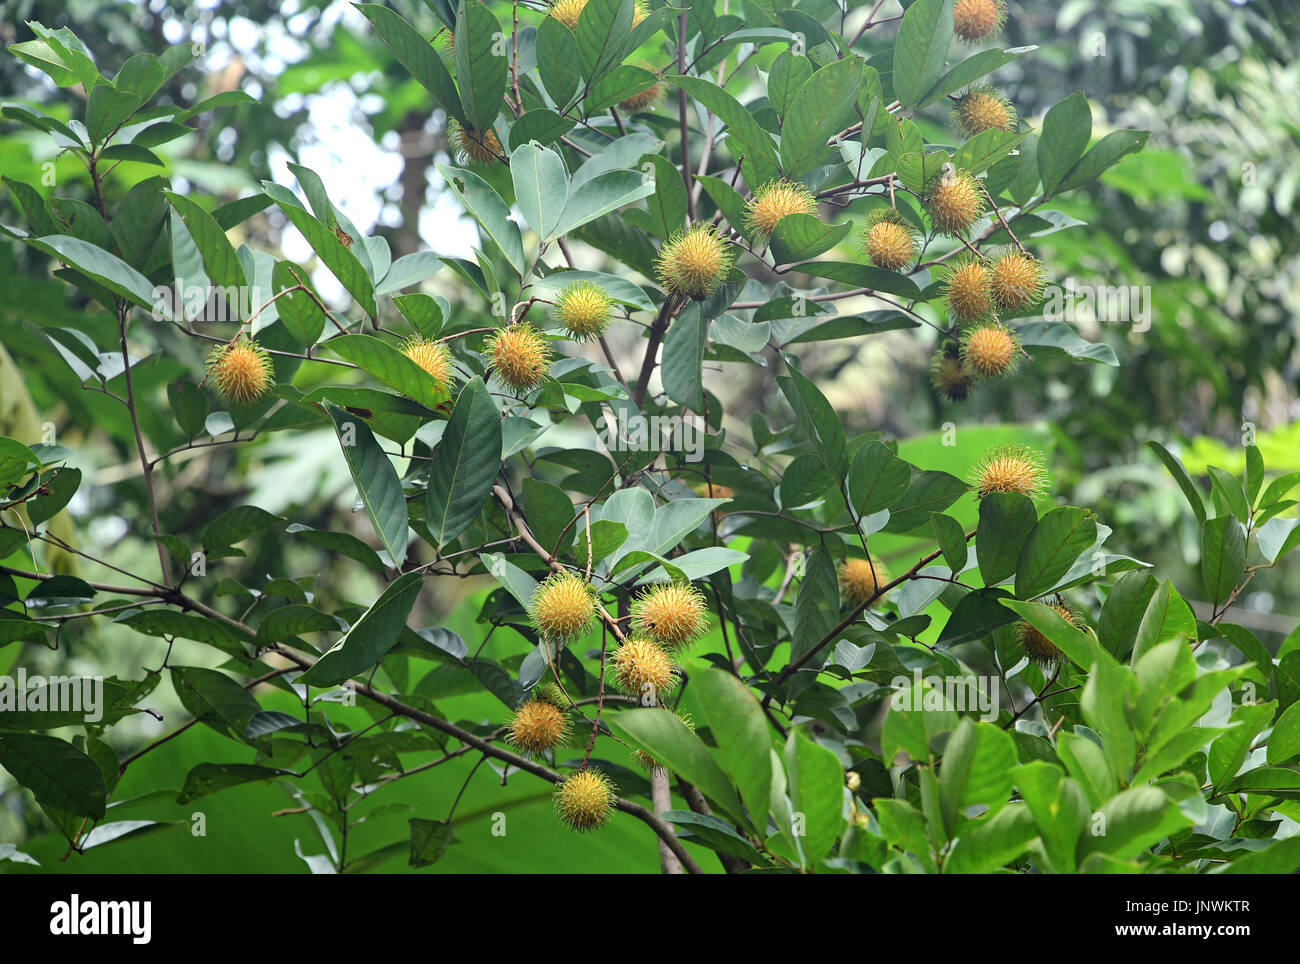 Rambutan tree with cluster of ripening spiky yellow fruits from Kerala, India. Stock Photo